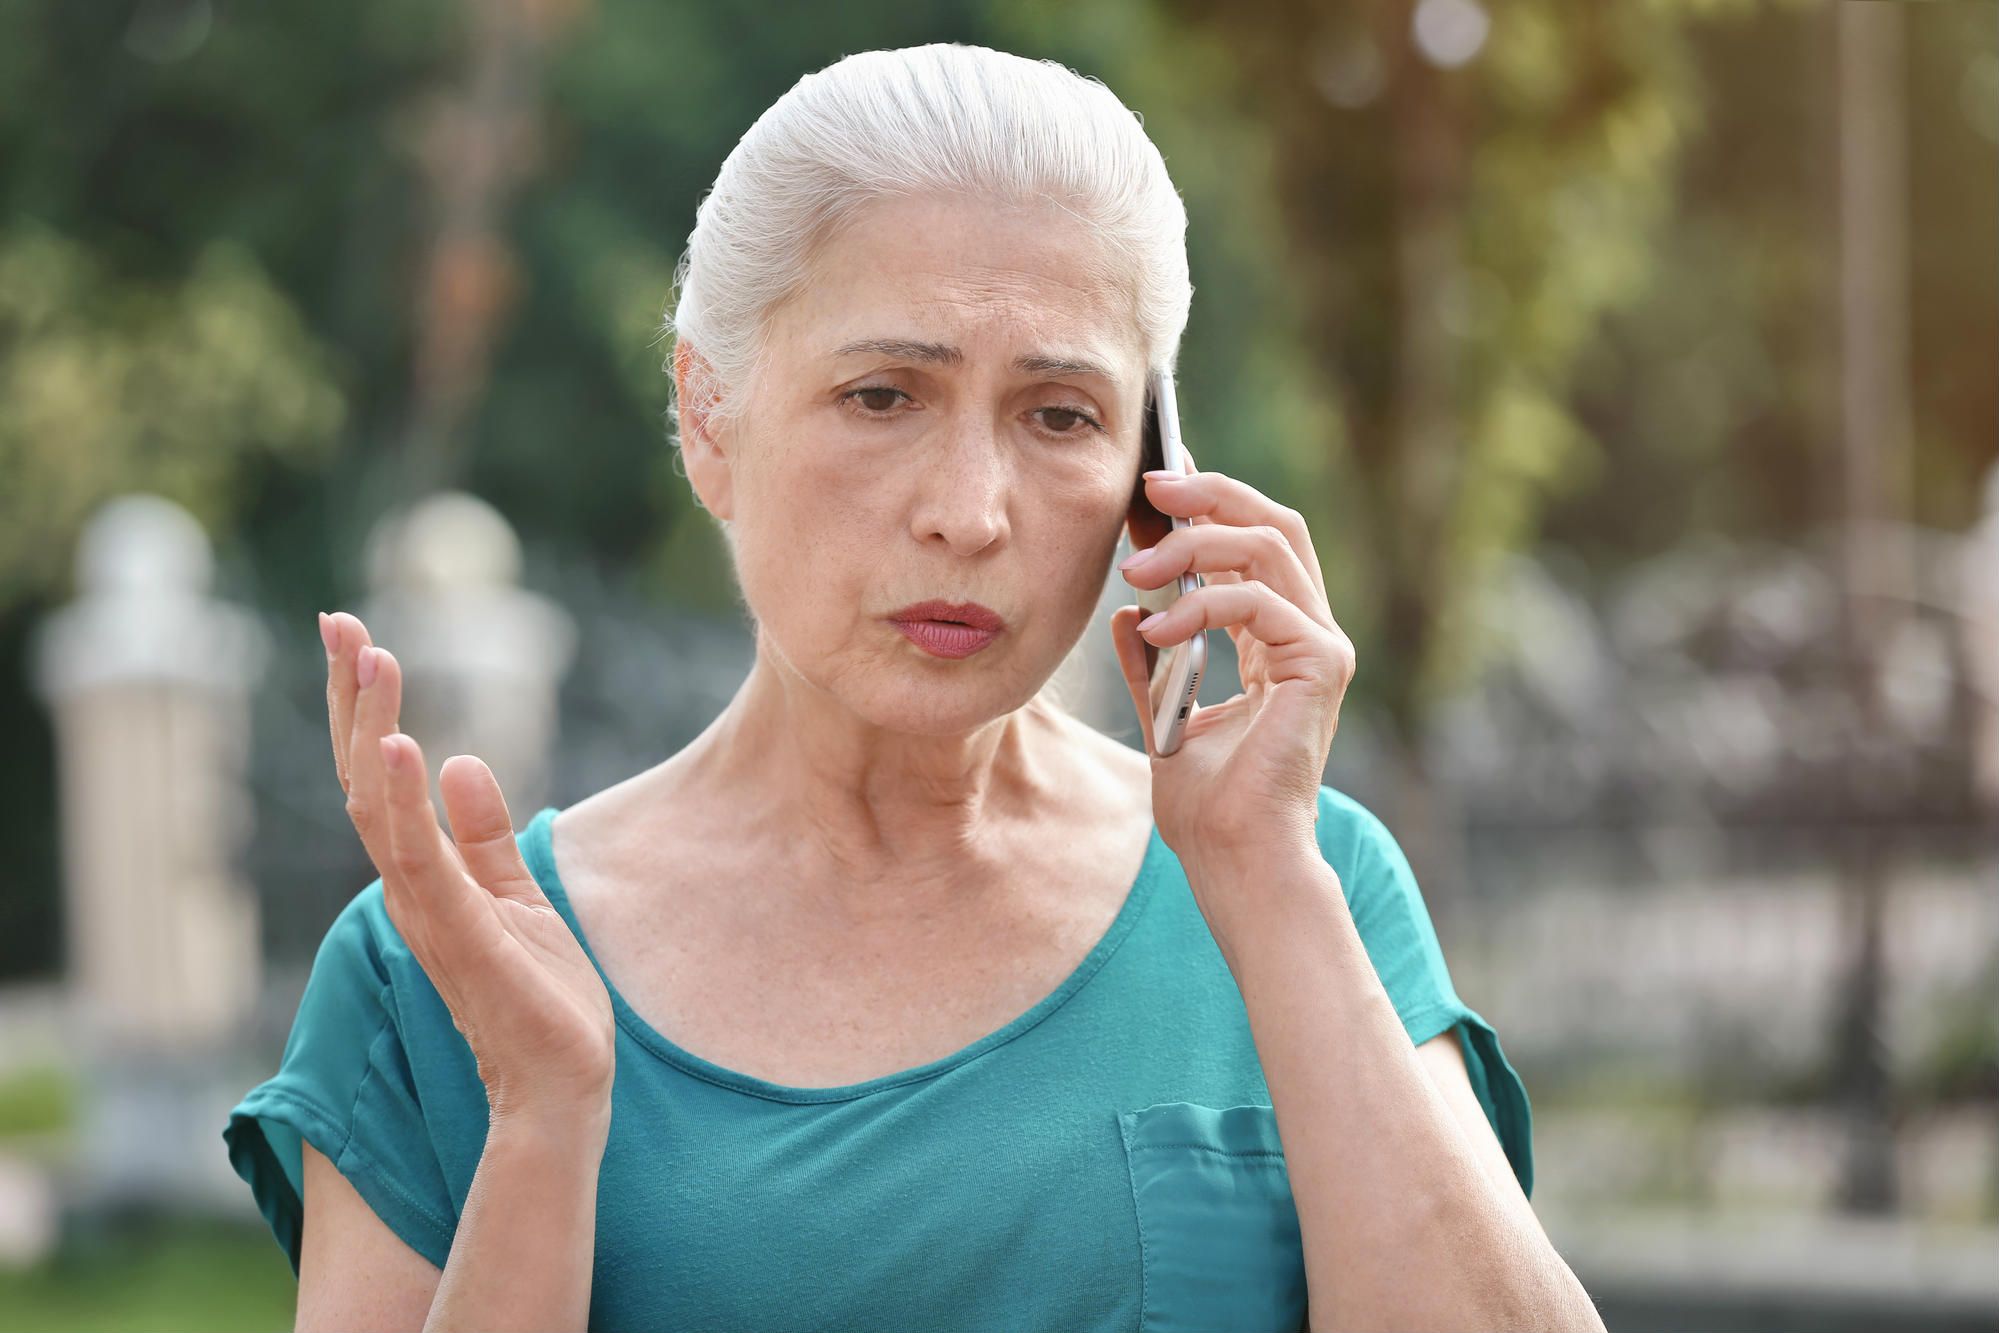 A woman is annoyed by a phone call